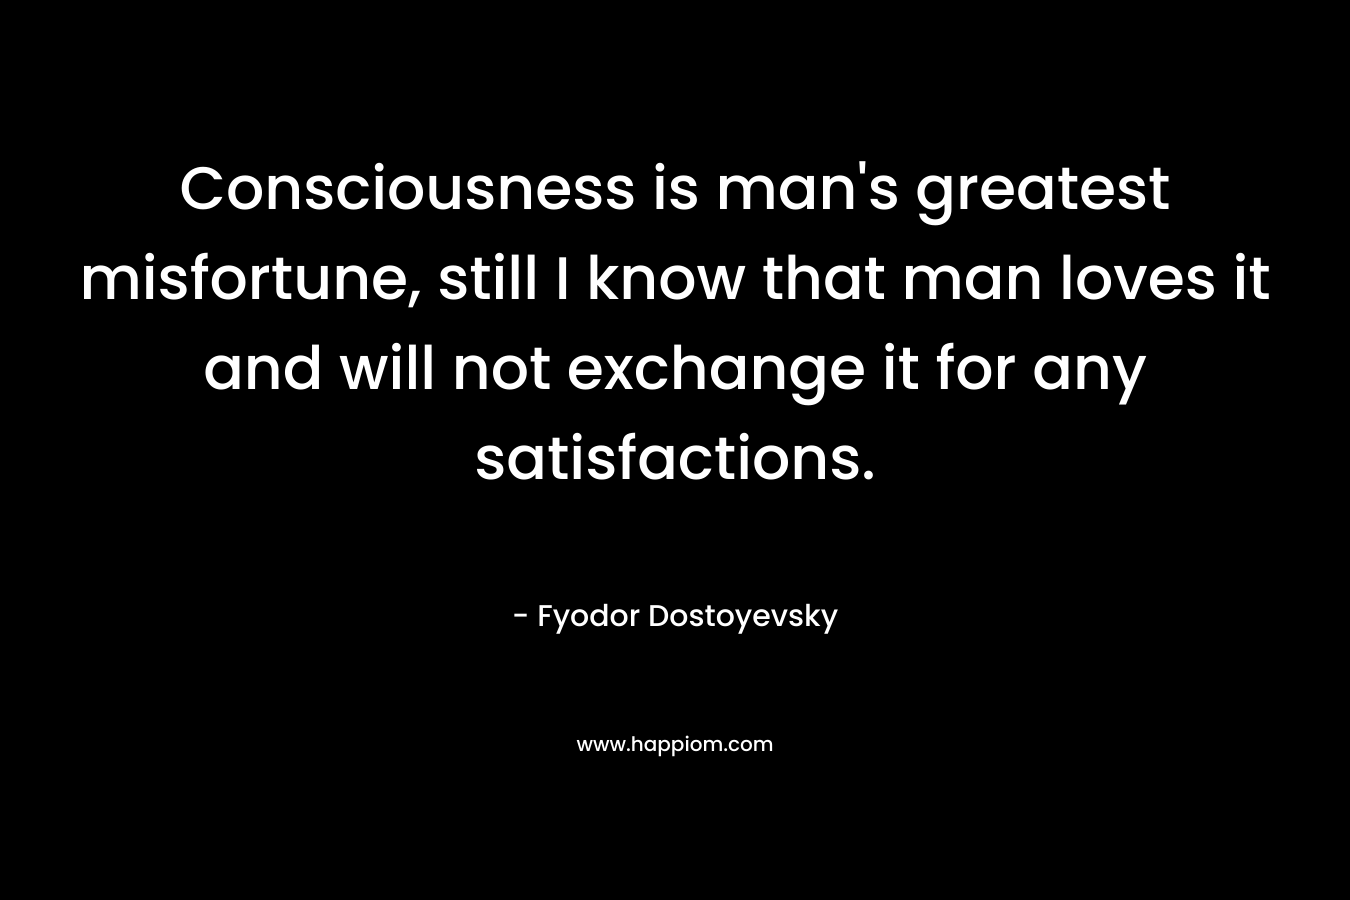 Consciousness is man’s greatest misfortune, still I know that man loves it and will not exchange it for any satisfactions. – Fyodor Dostoyevsky